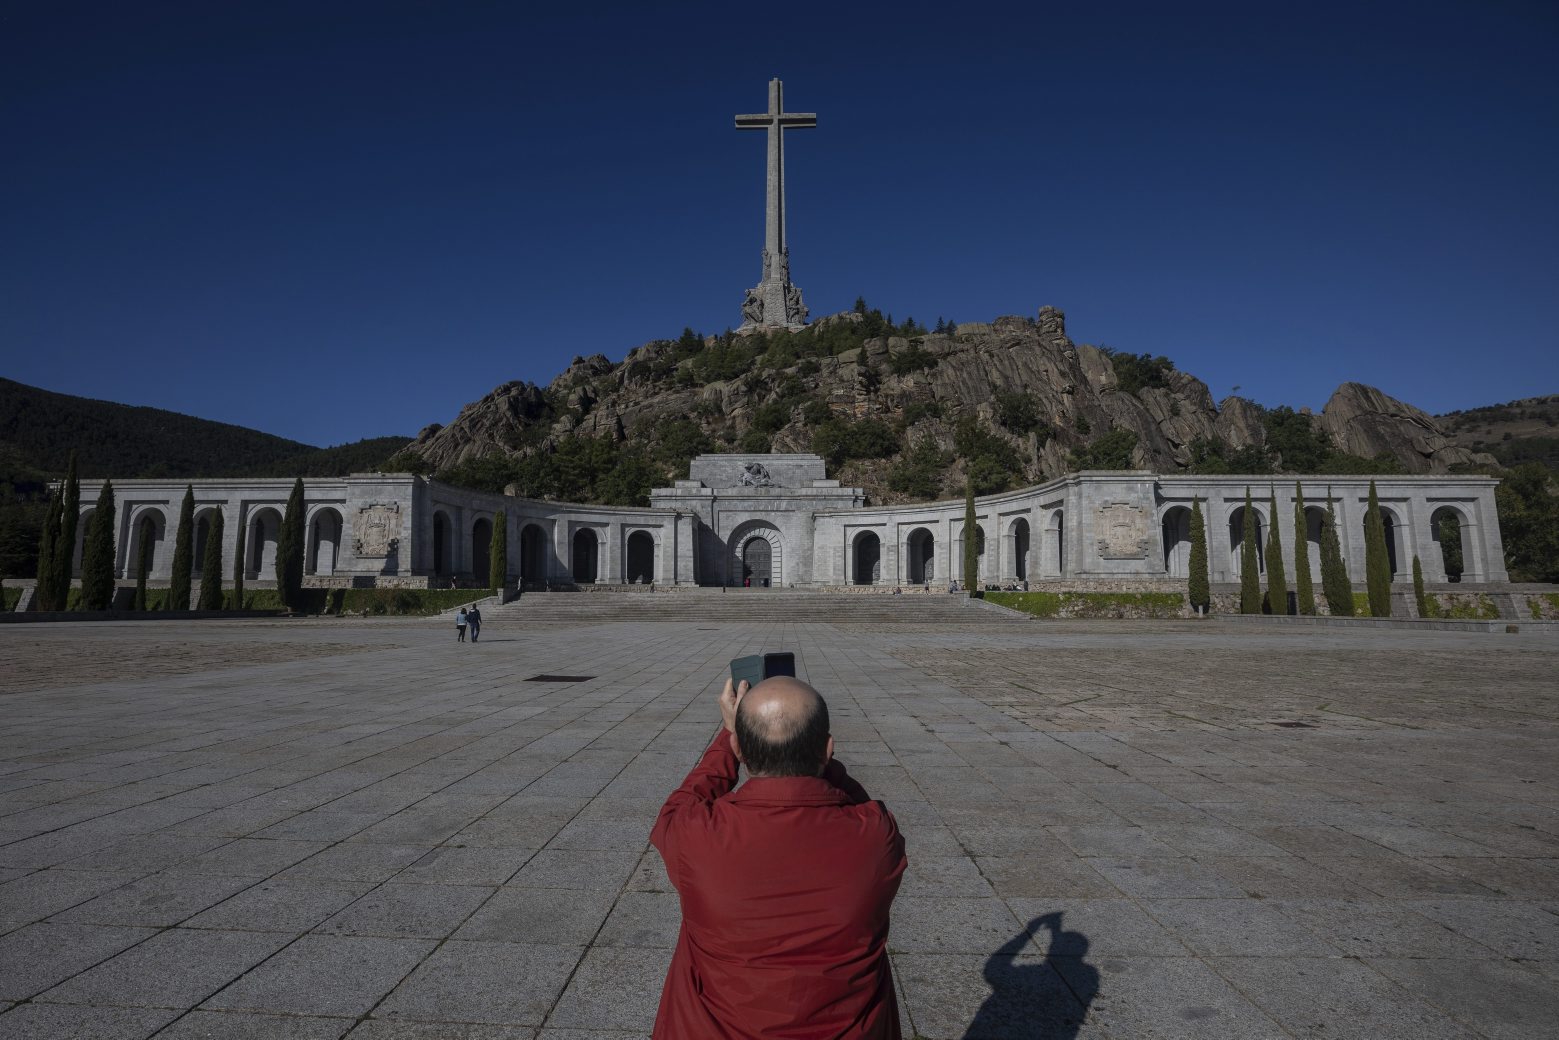 A visitor takes a snapshot at the Valley of the Fallen mausoleum near El Escorial, outskirts of Madrid, Spain, Tuesday, Sept. 24, 2019. The Spanish Supreme Court has ruled that the caretaker Socialist government can exhume the remains of former dictator Gen. Francisco Franco. Leftist parties and families of many Spanish Civil War victims have long wanted Franco to be removed from the mausoleum, which is a major tourist attraction. Others argue this would open old wounds. (AP Photo/Bernat Armangue) APTOPIX Spain Franco's Remains